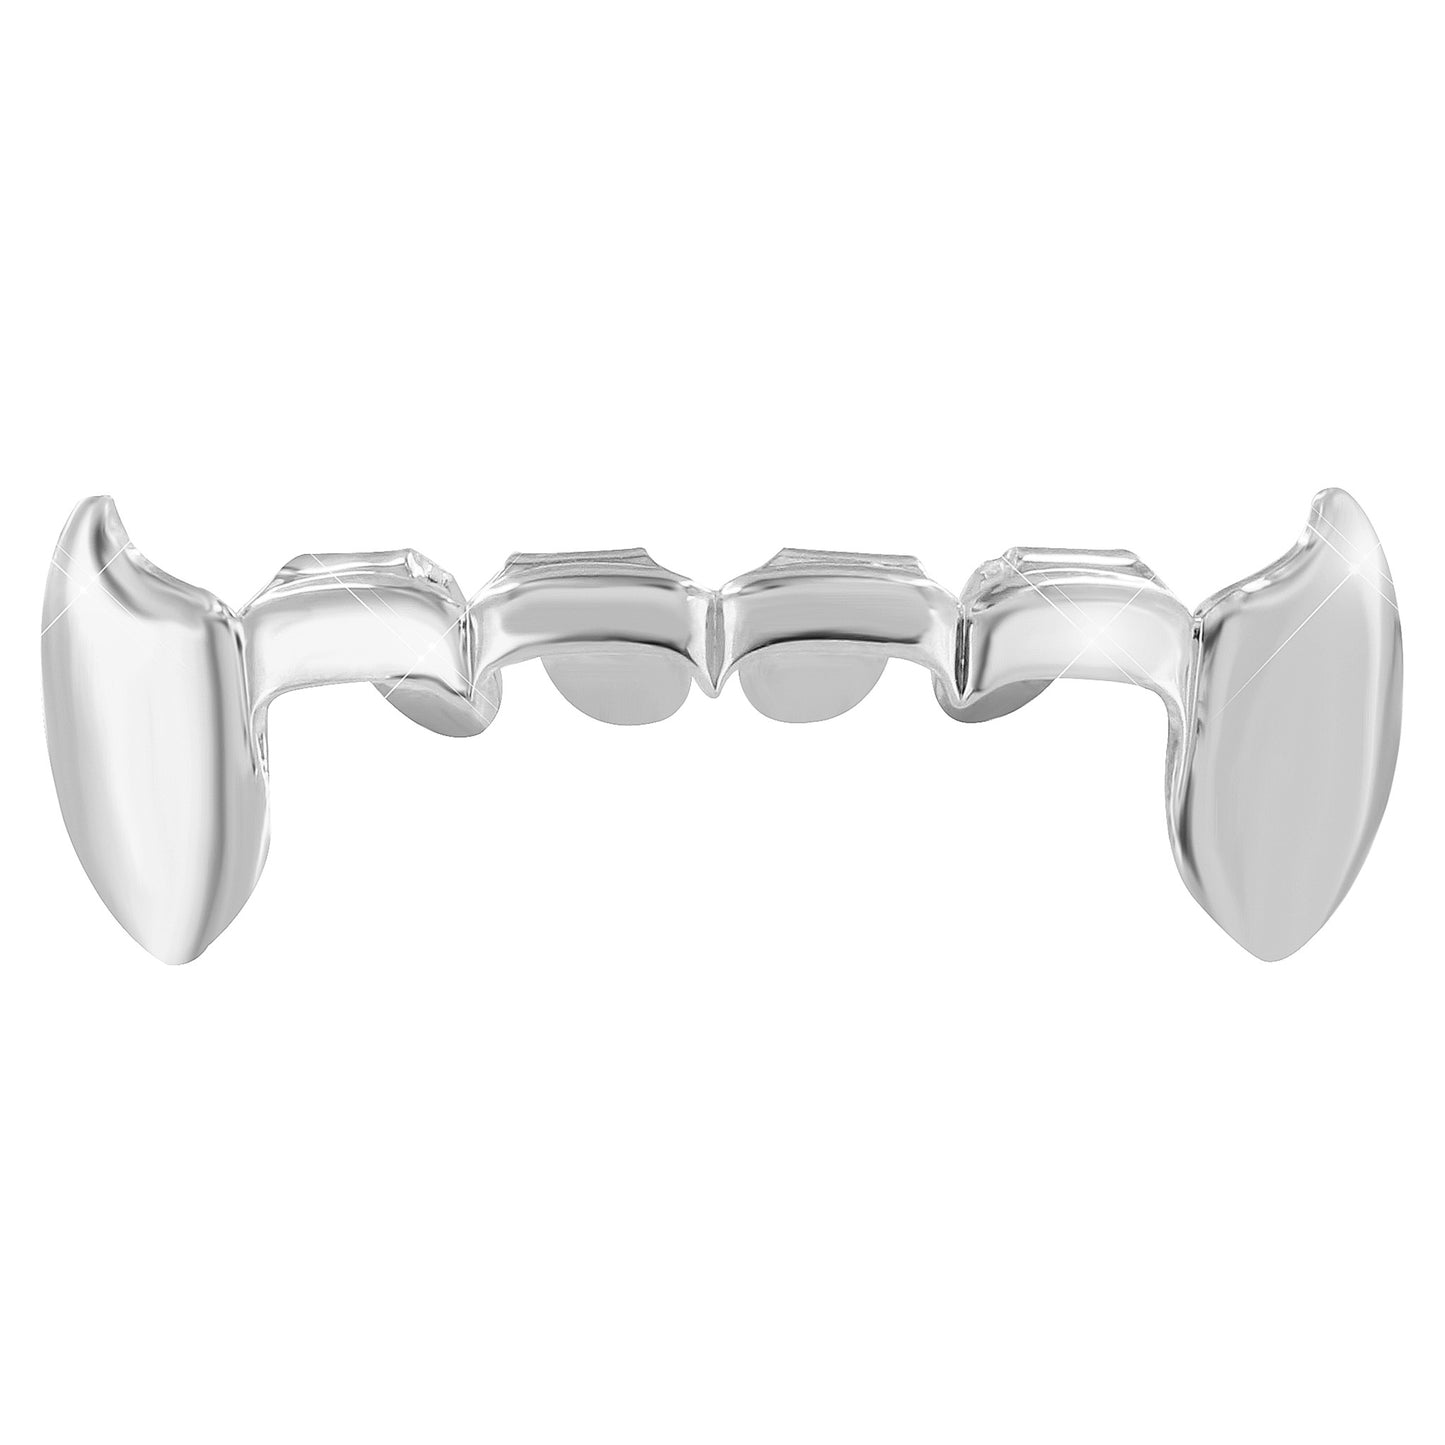 Fangs Upper Teeth Caps Top Mouth Grillz White Gold Plated